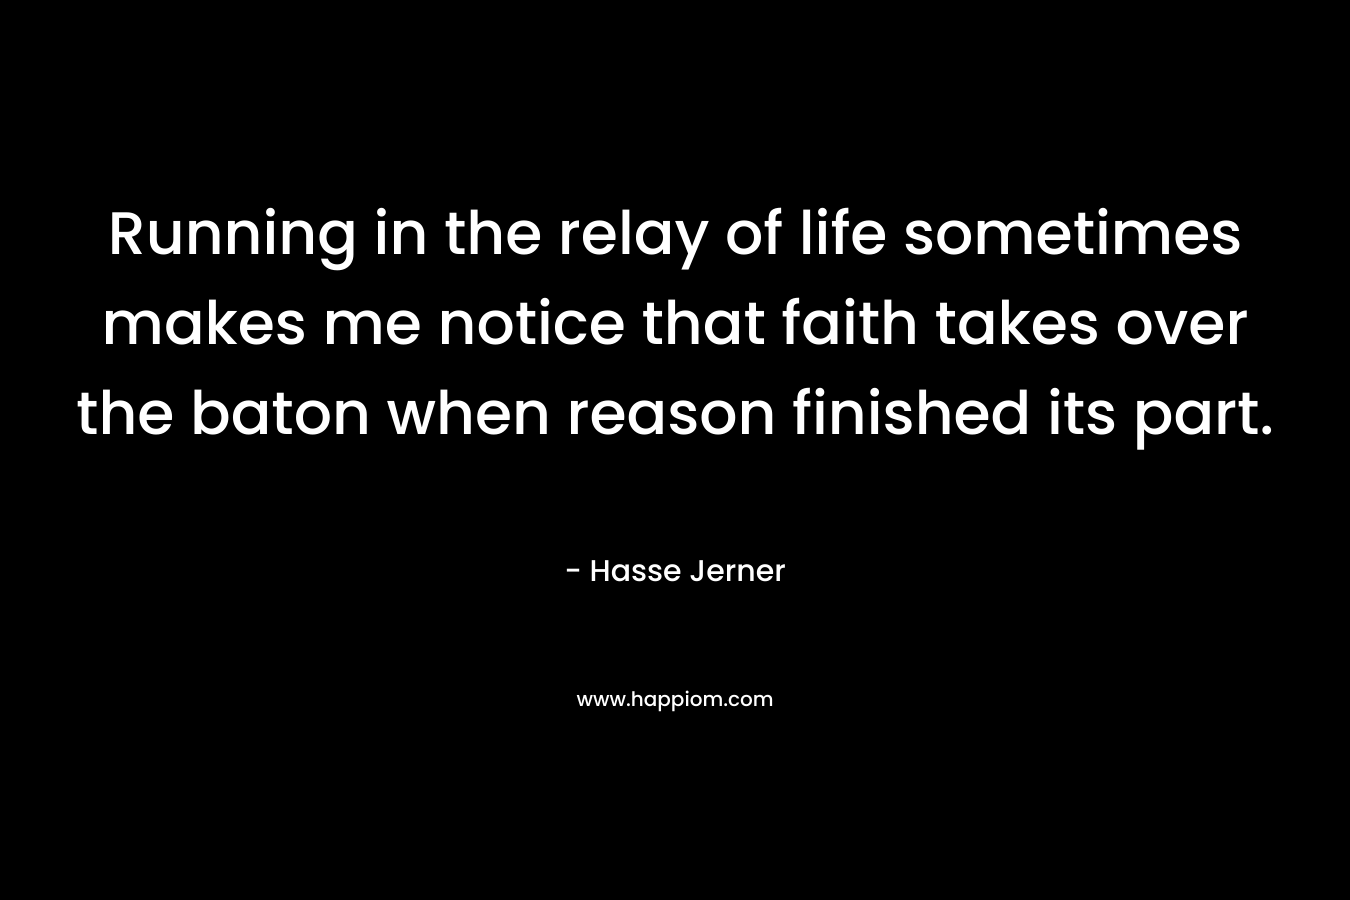 Running in the relay of life sometimes makes me notice that faith takes over the baton when reason finished its part.